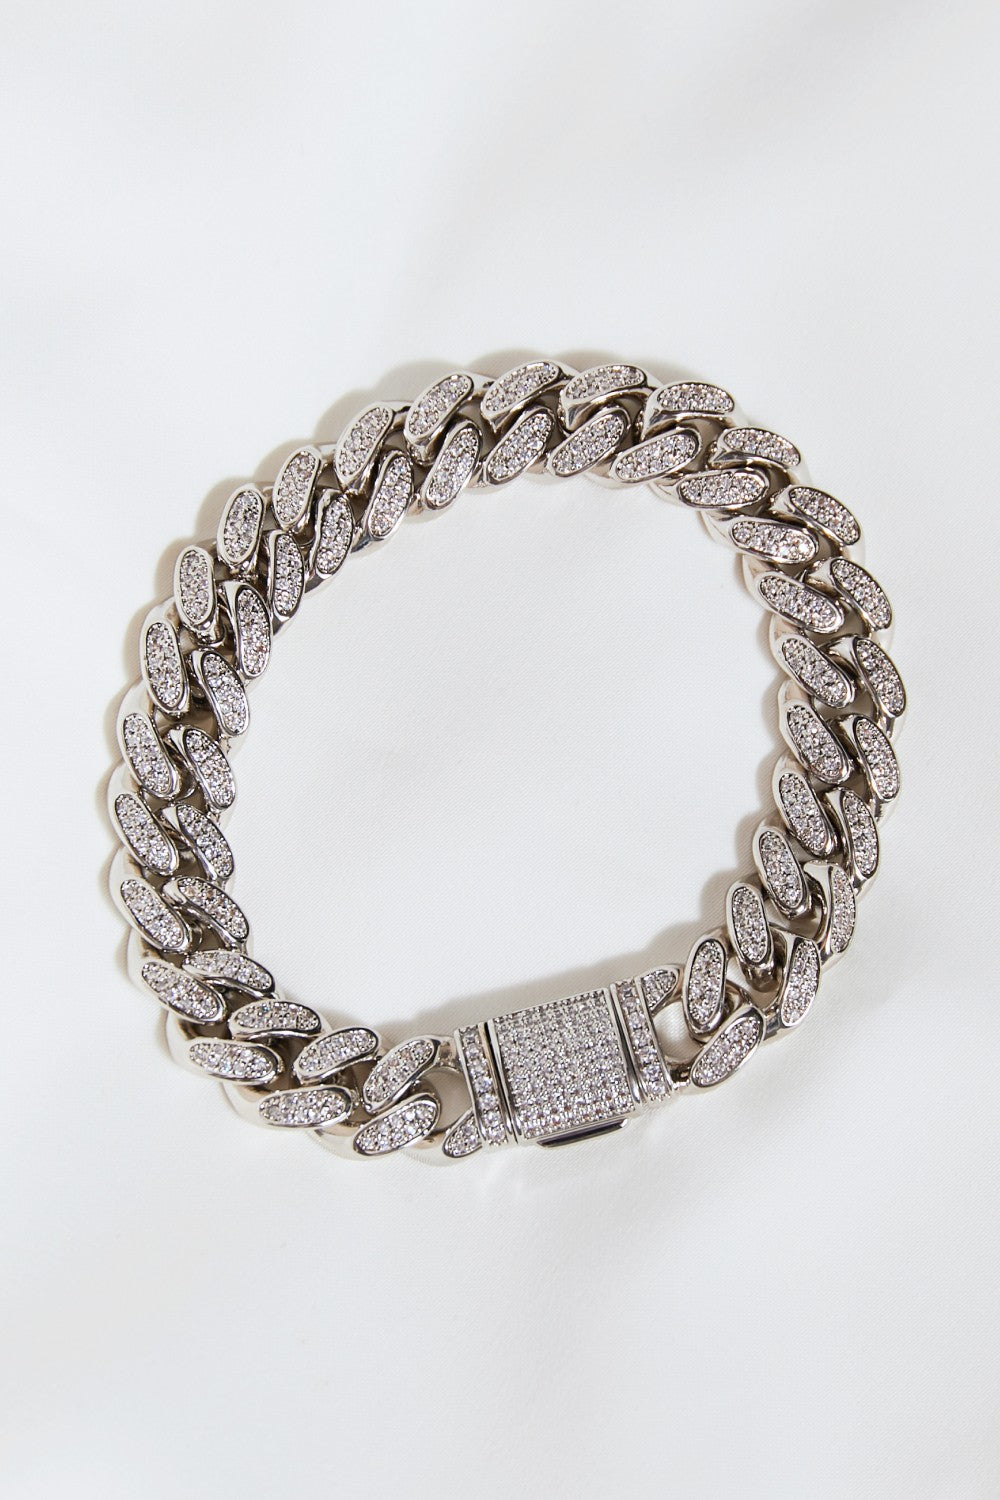 GNJ MANUFACTURING Curb Chain Bracelet in Silver - Ryzela